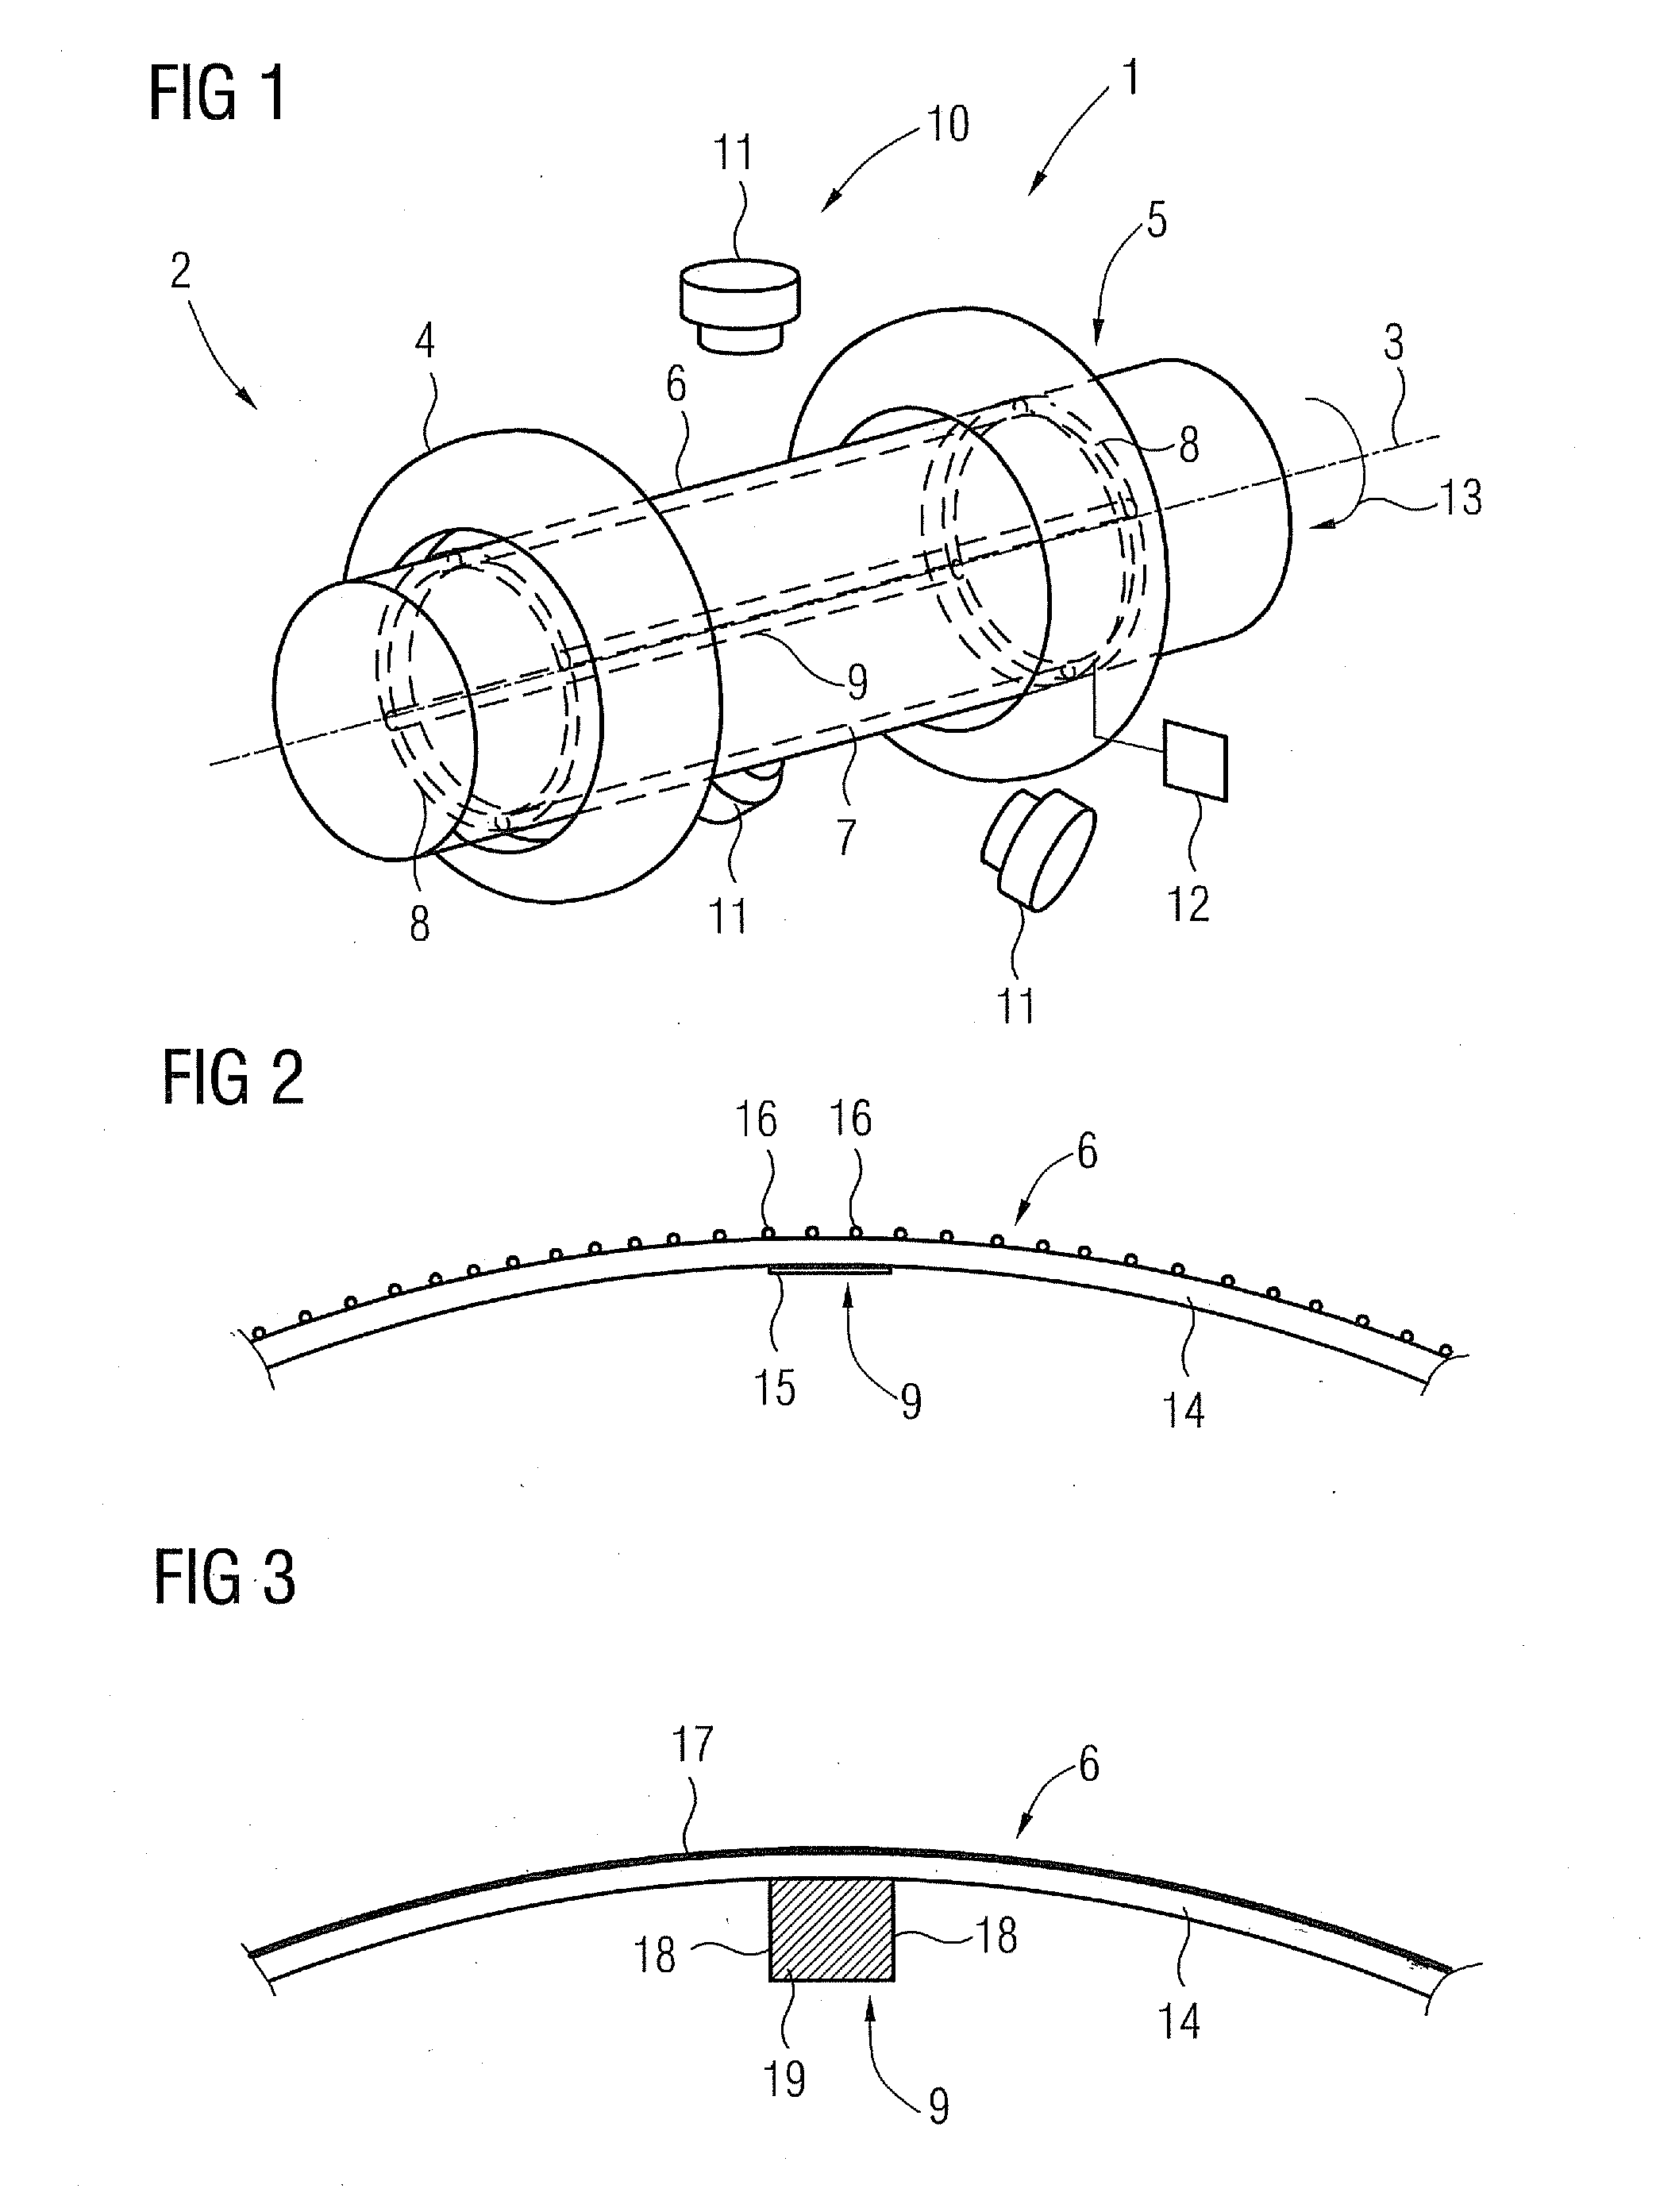 Whole-Body Coil Arrangement for an Open Magnetic Resonance Scanner for Use With a Second Diagnostic and/or Therapeutic Modality